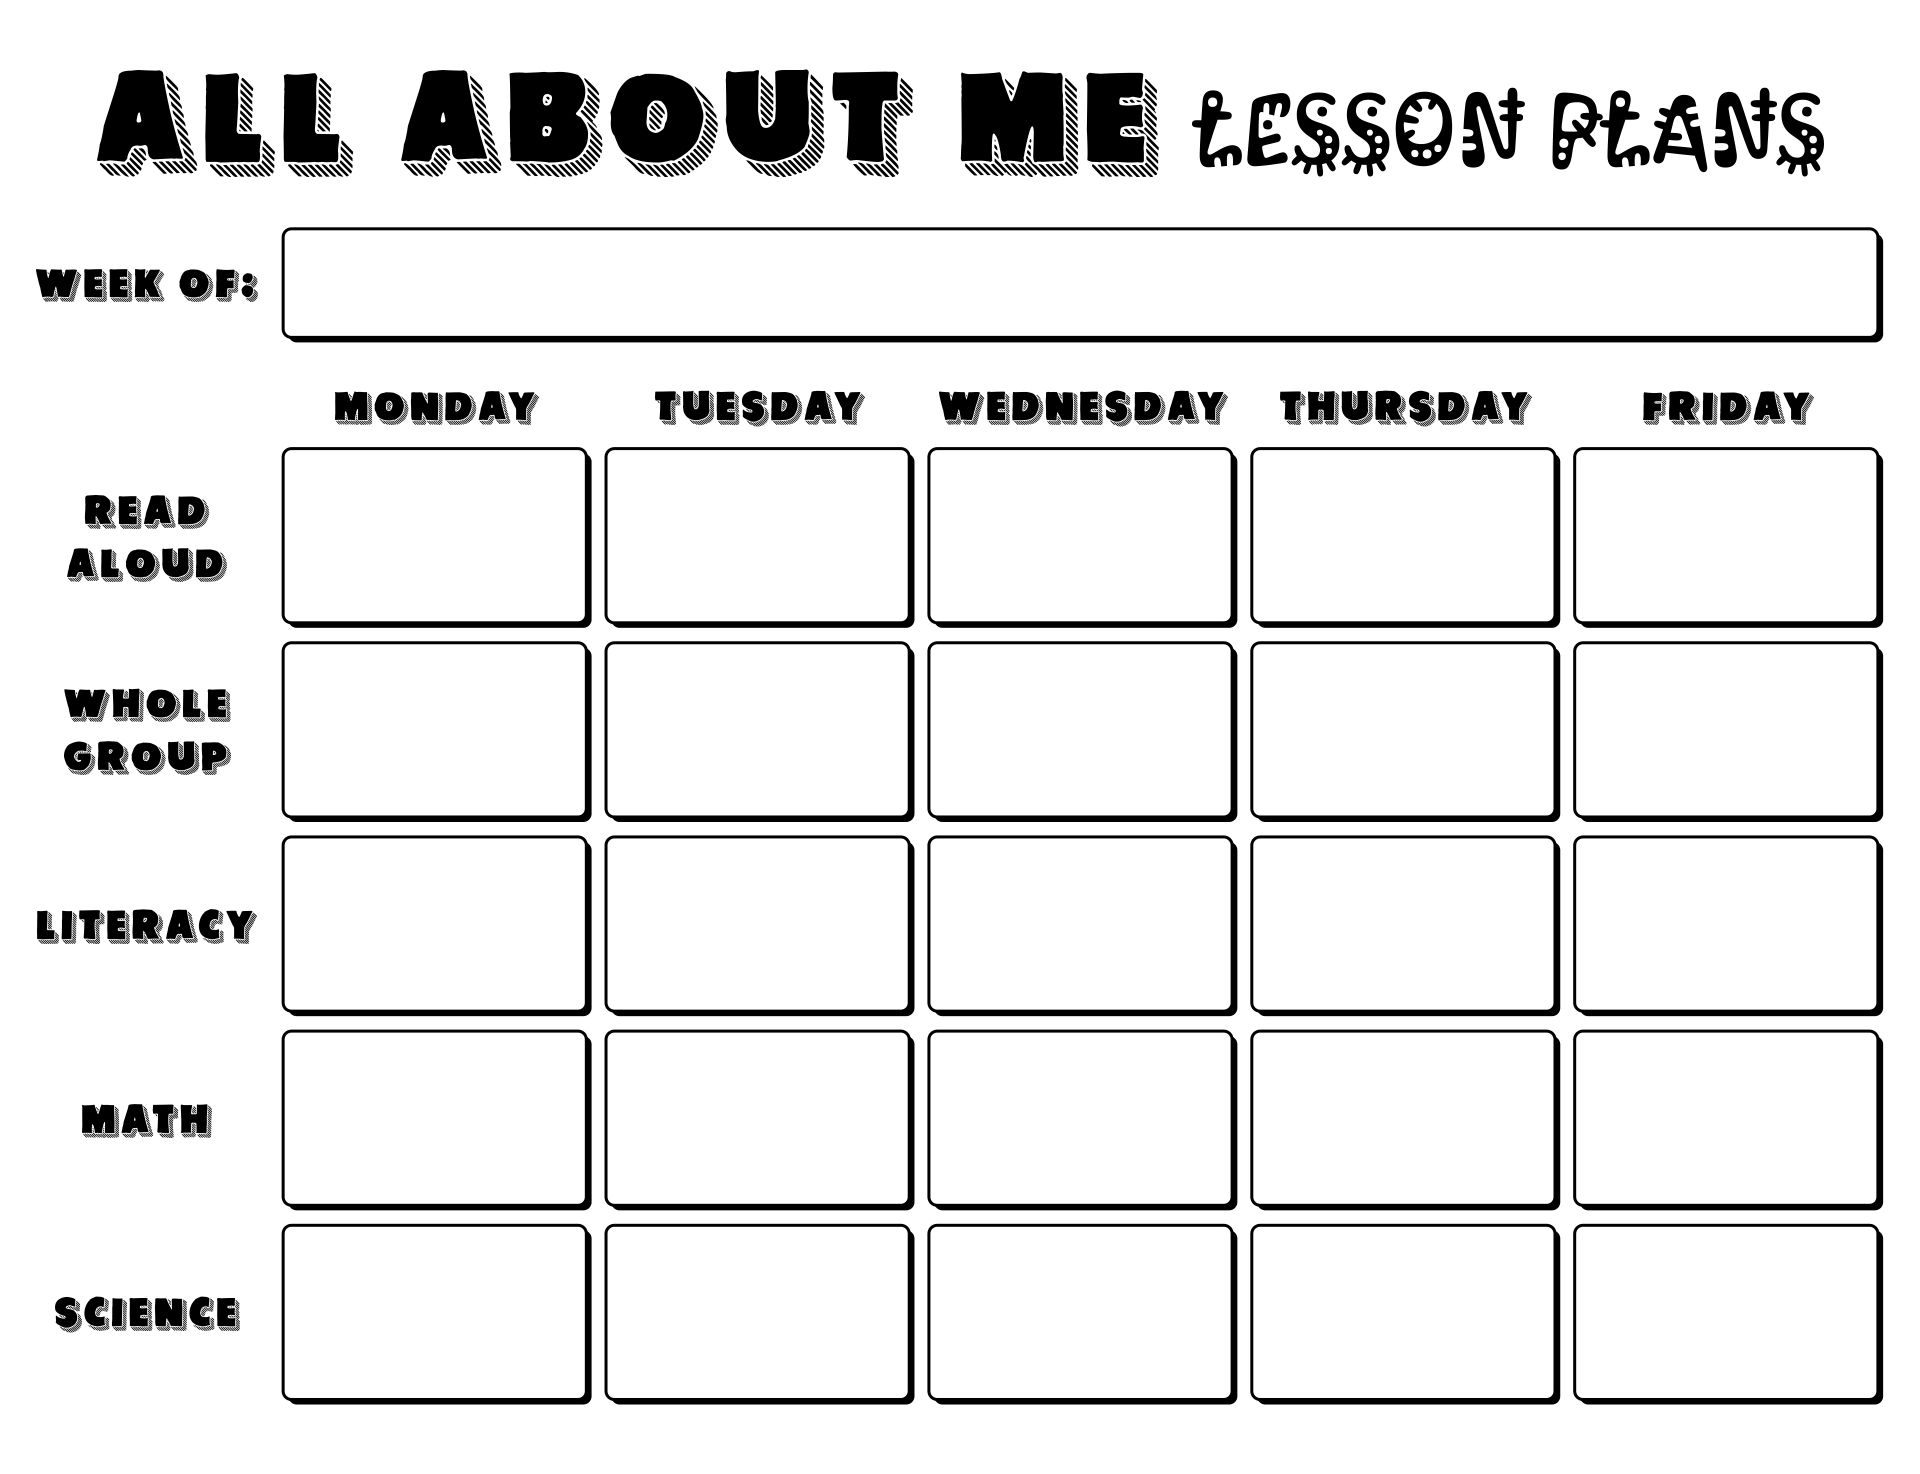 All About Me Lesson Plans Printable